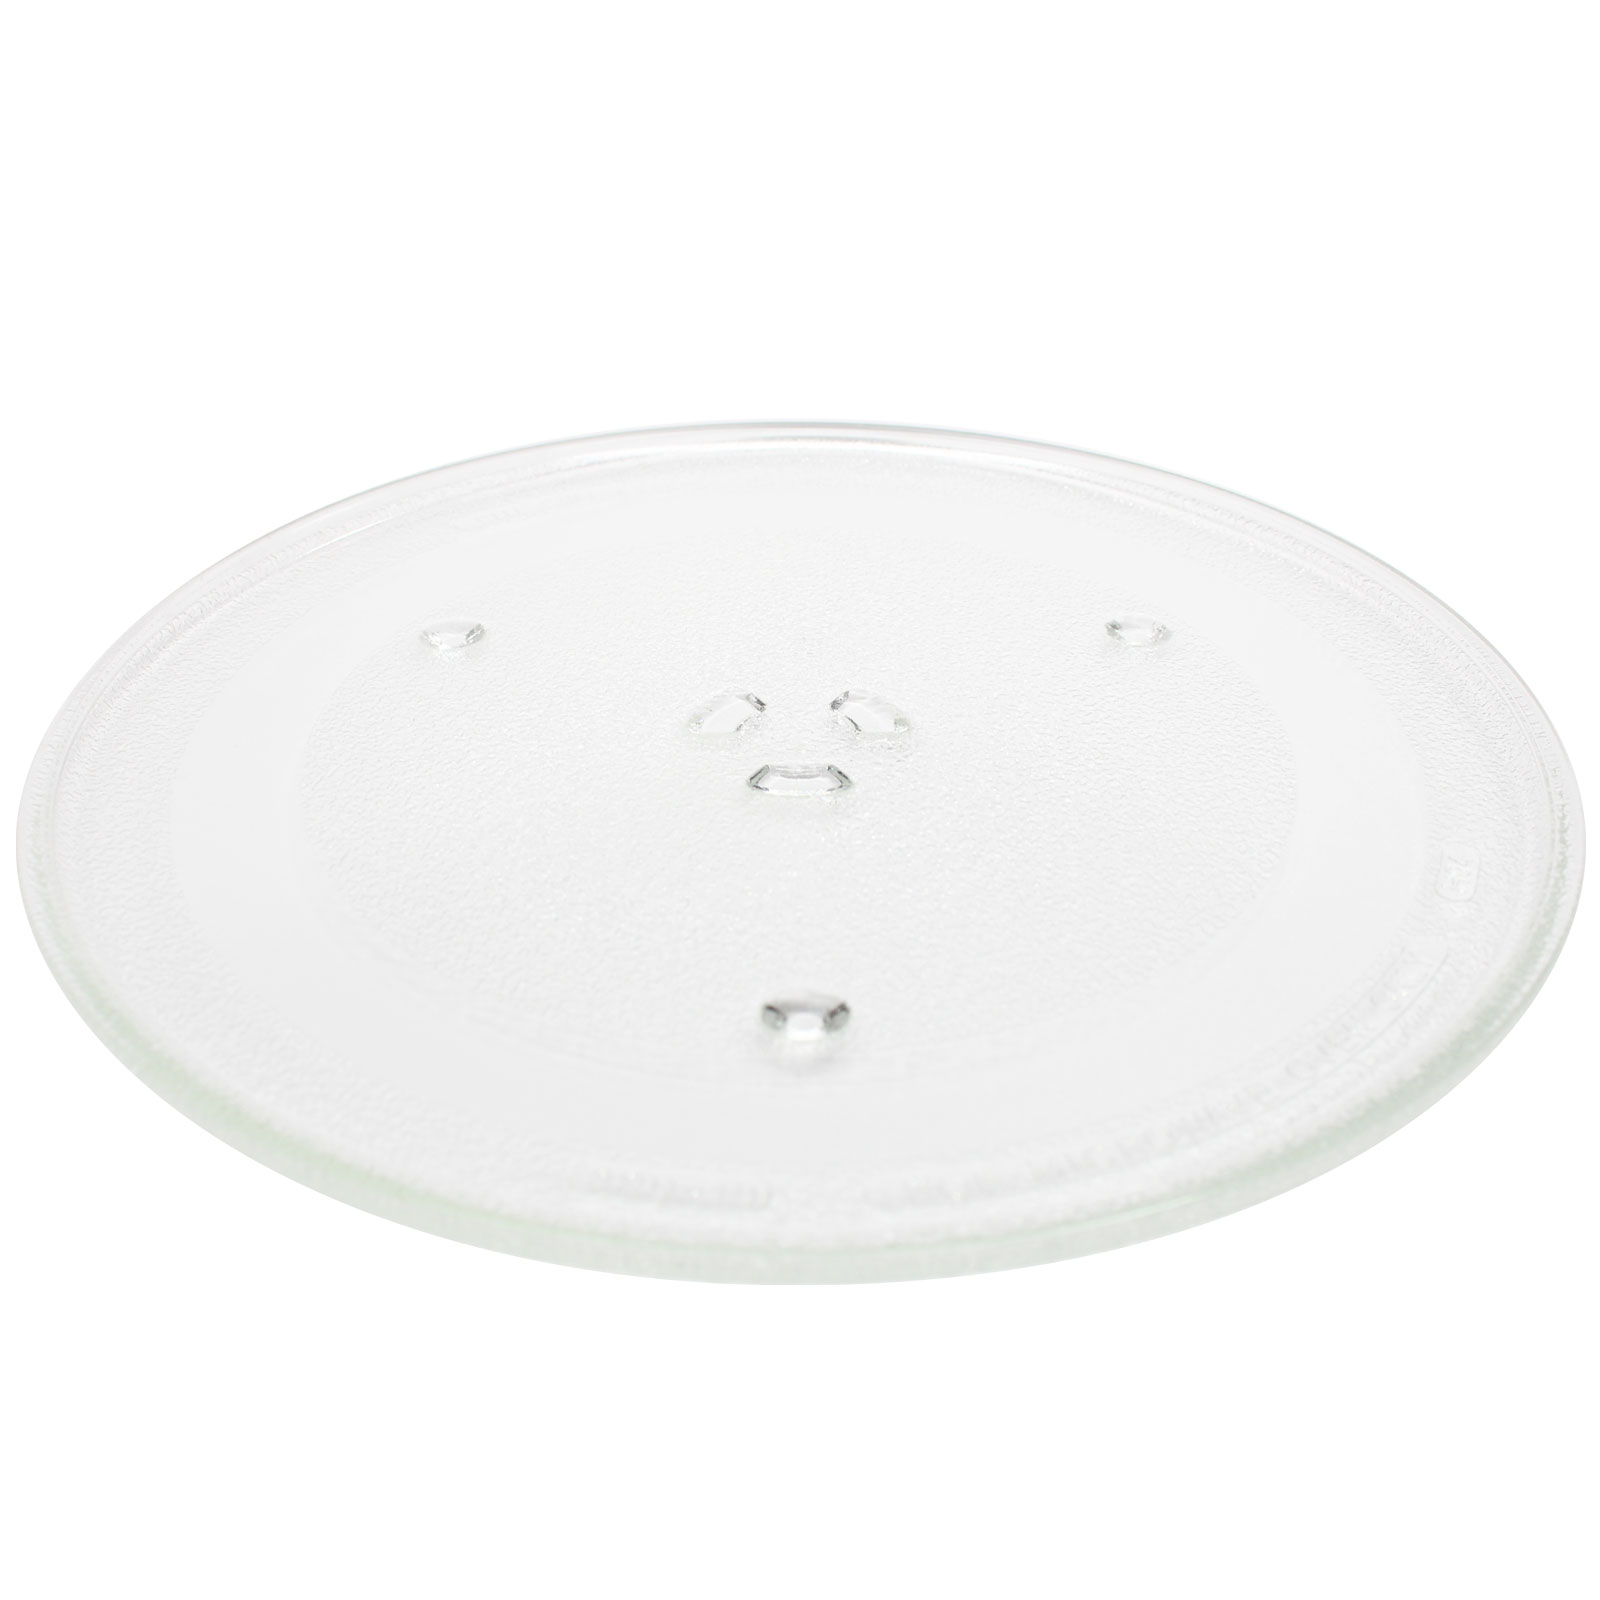 UpStart Components Replacement Frigidaire/Tappan FMV158FMB Microwave Glass Plate  - For Frigidaire/Tappan 5304408984 Microwave Glass Tray - 12 1/2"